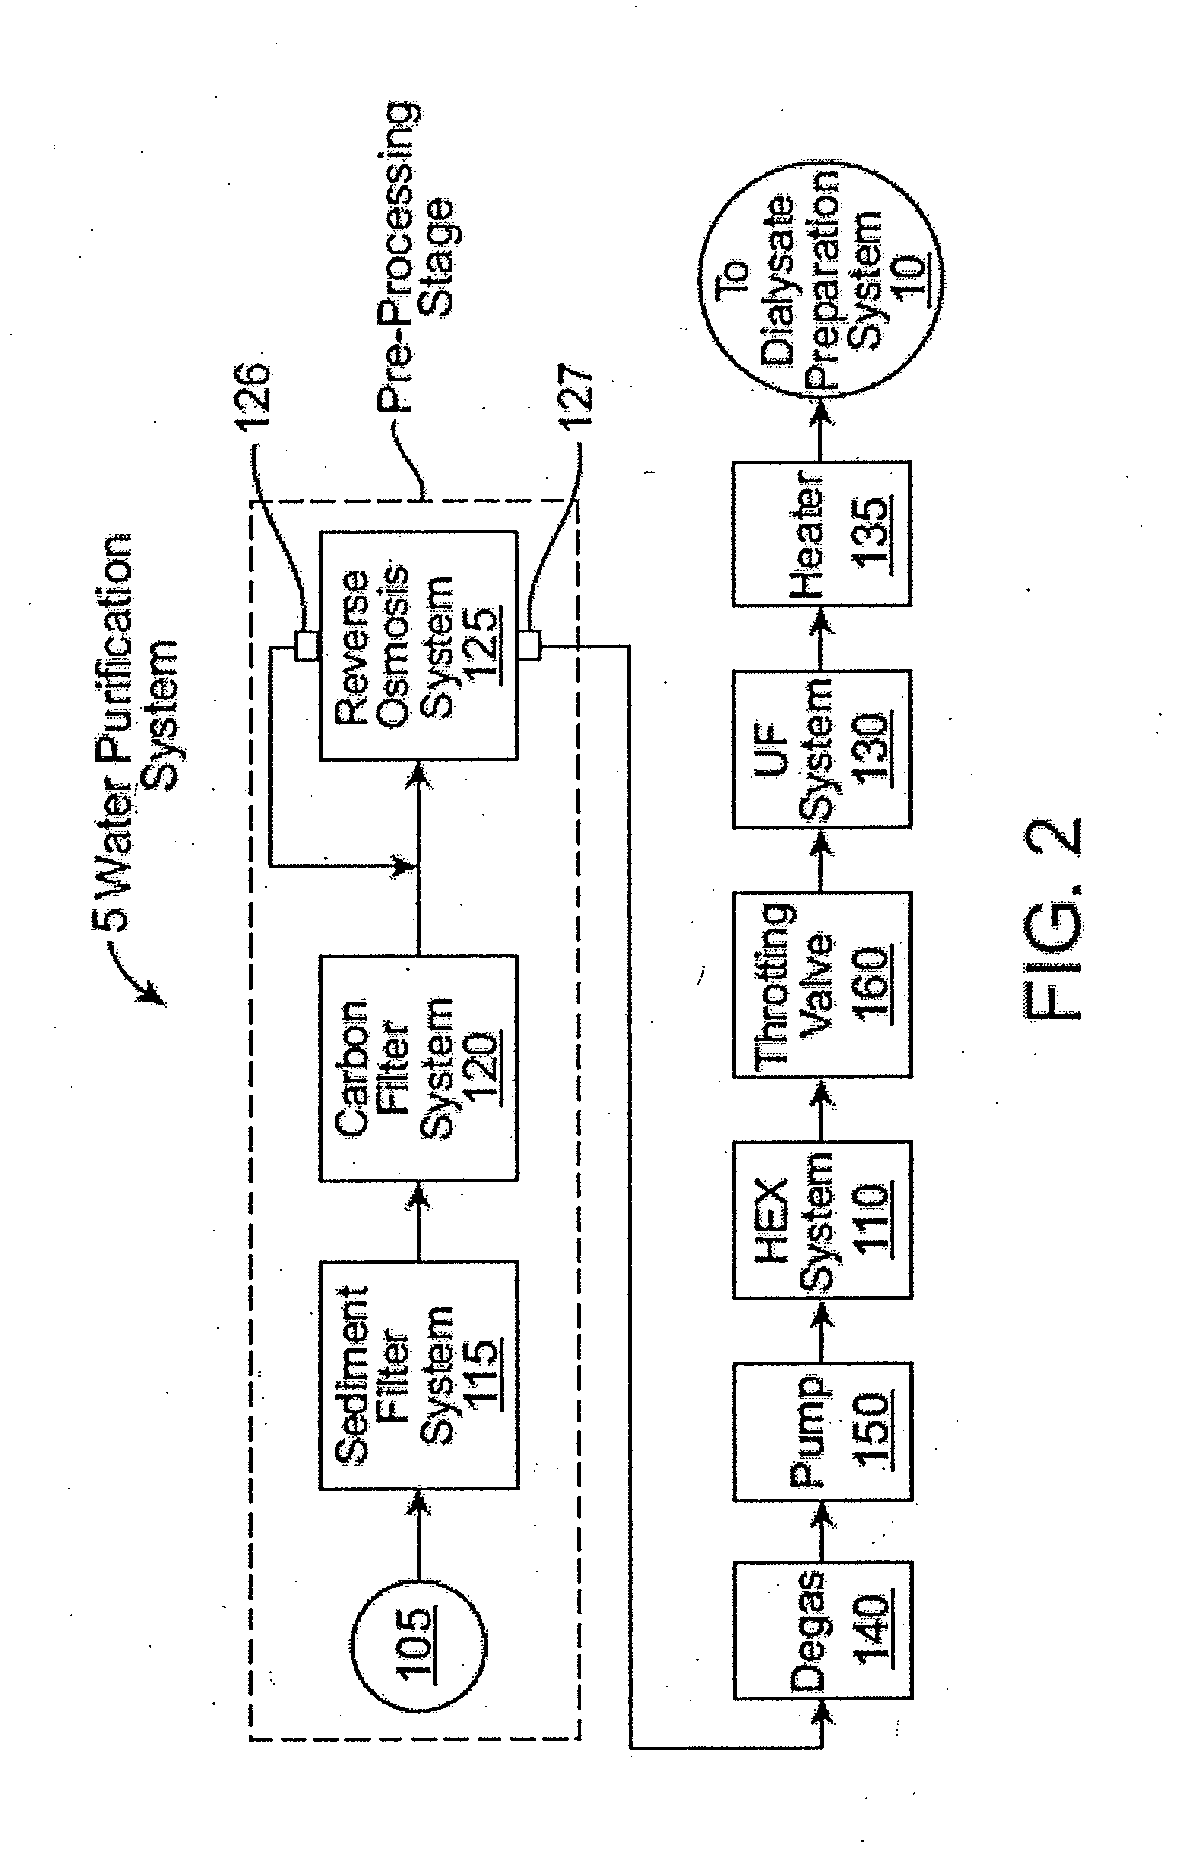 Dialysate mixing and dialyzer control for dialysis system